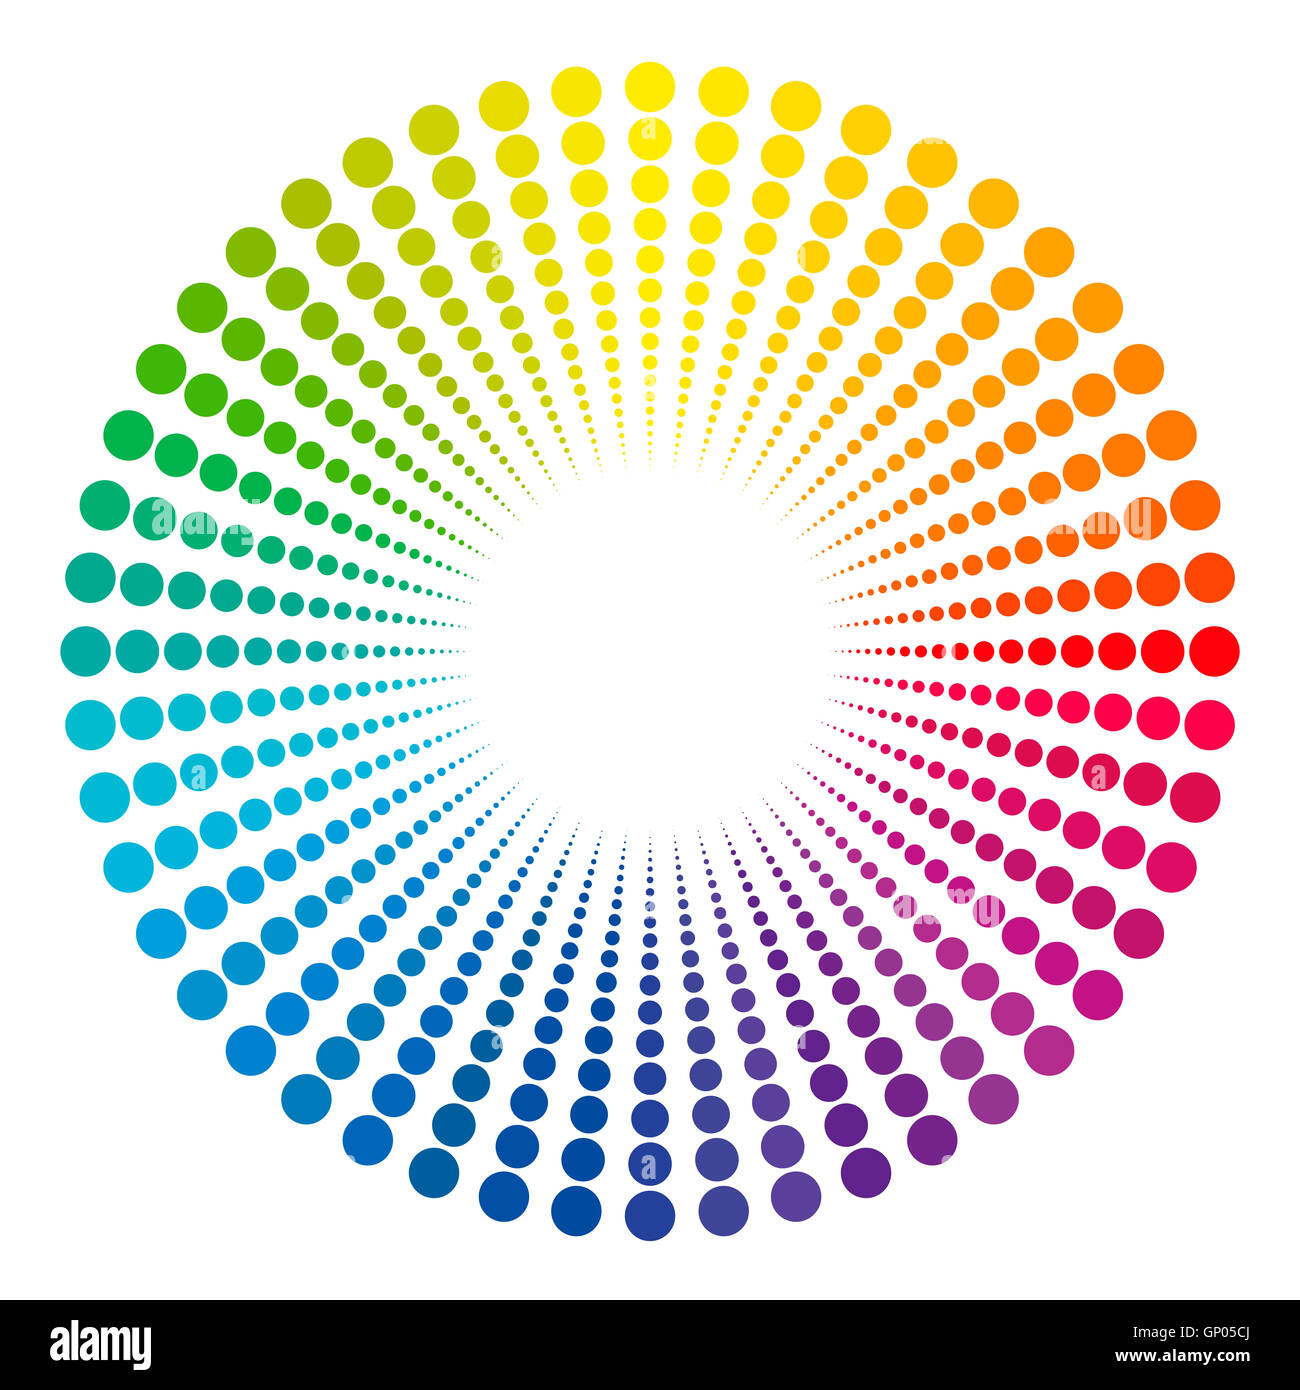 To see light at the end of the tunnel - symbolically depicted with a rainbow colored dot pattern. Stock Photo